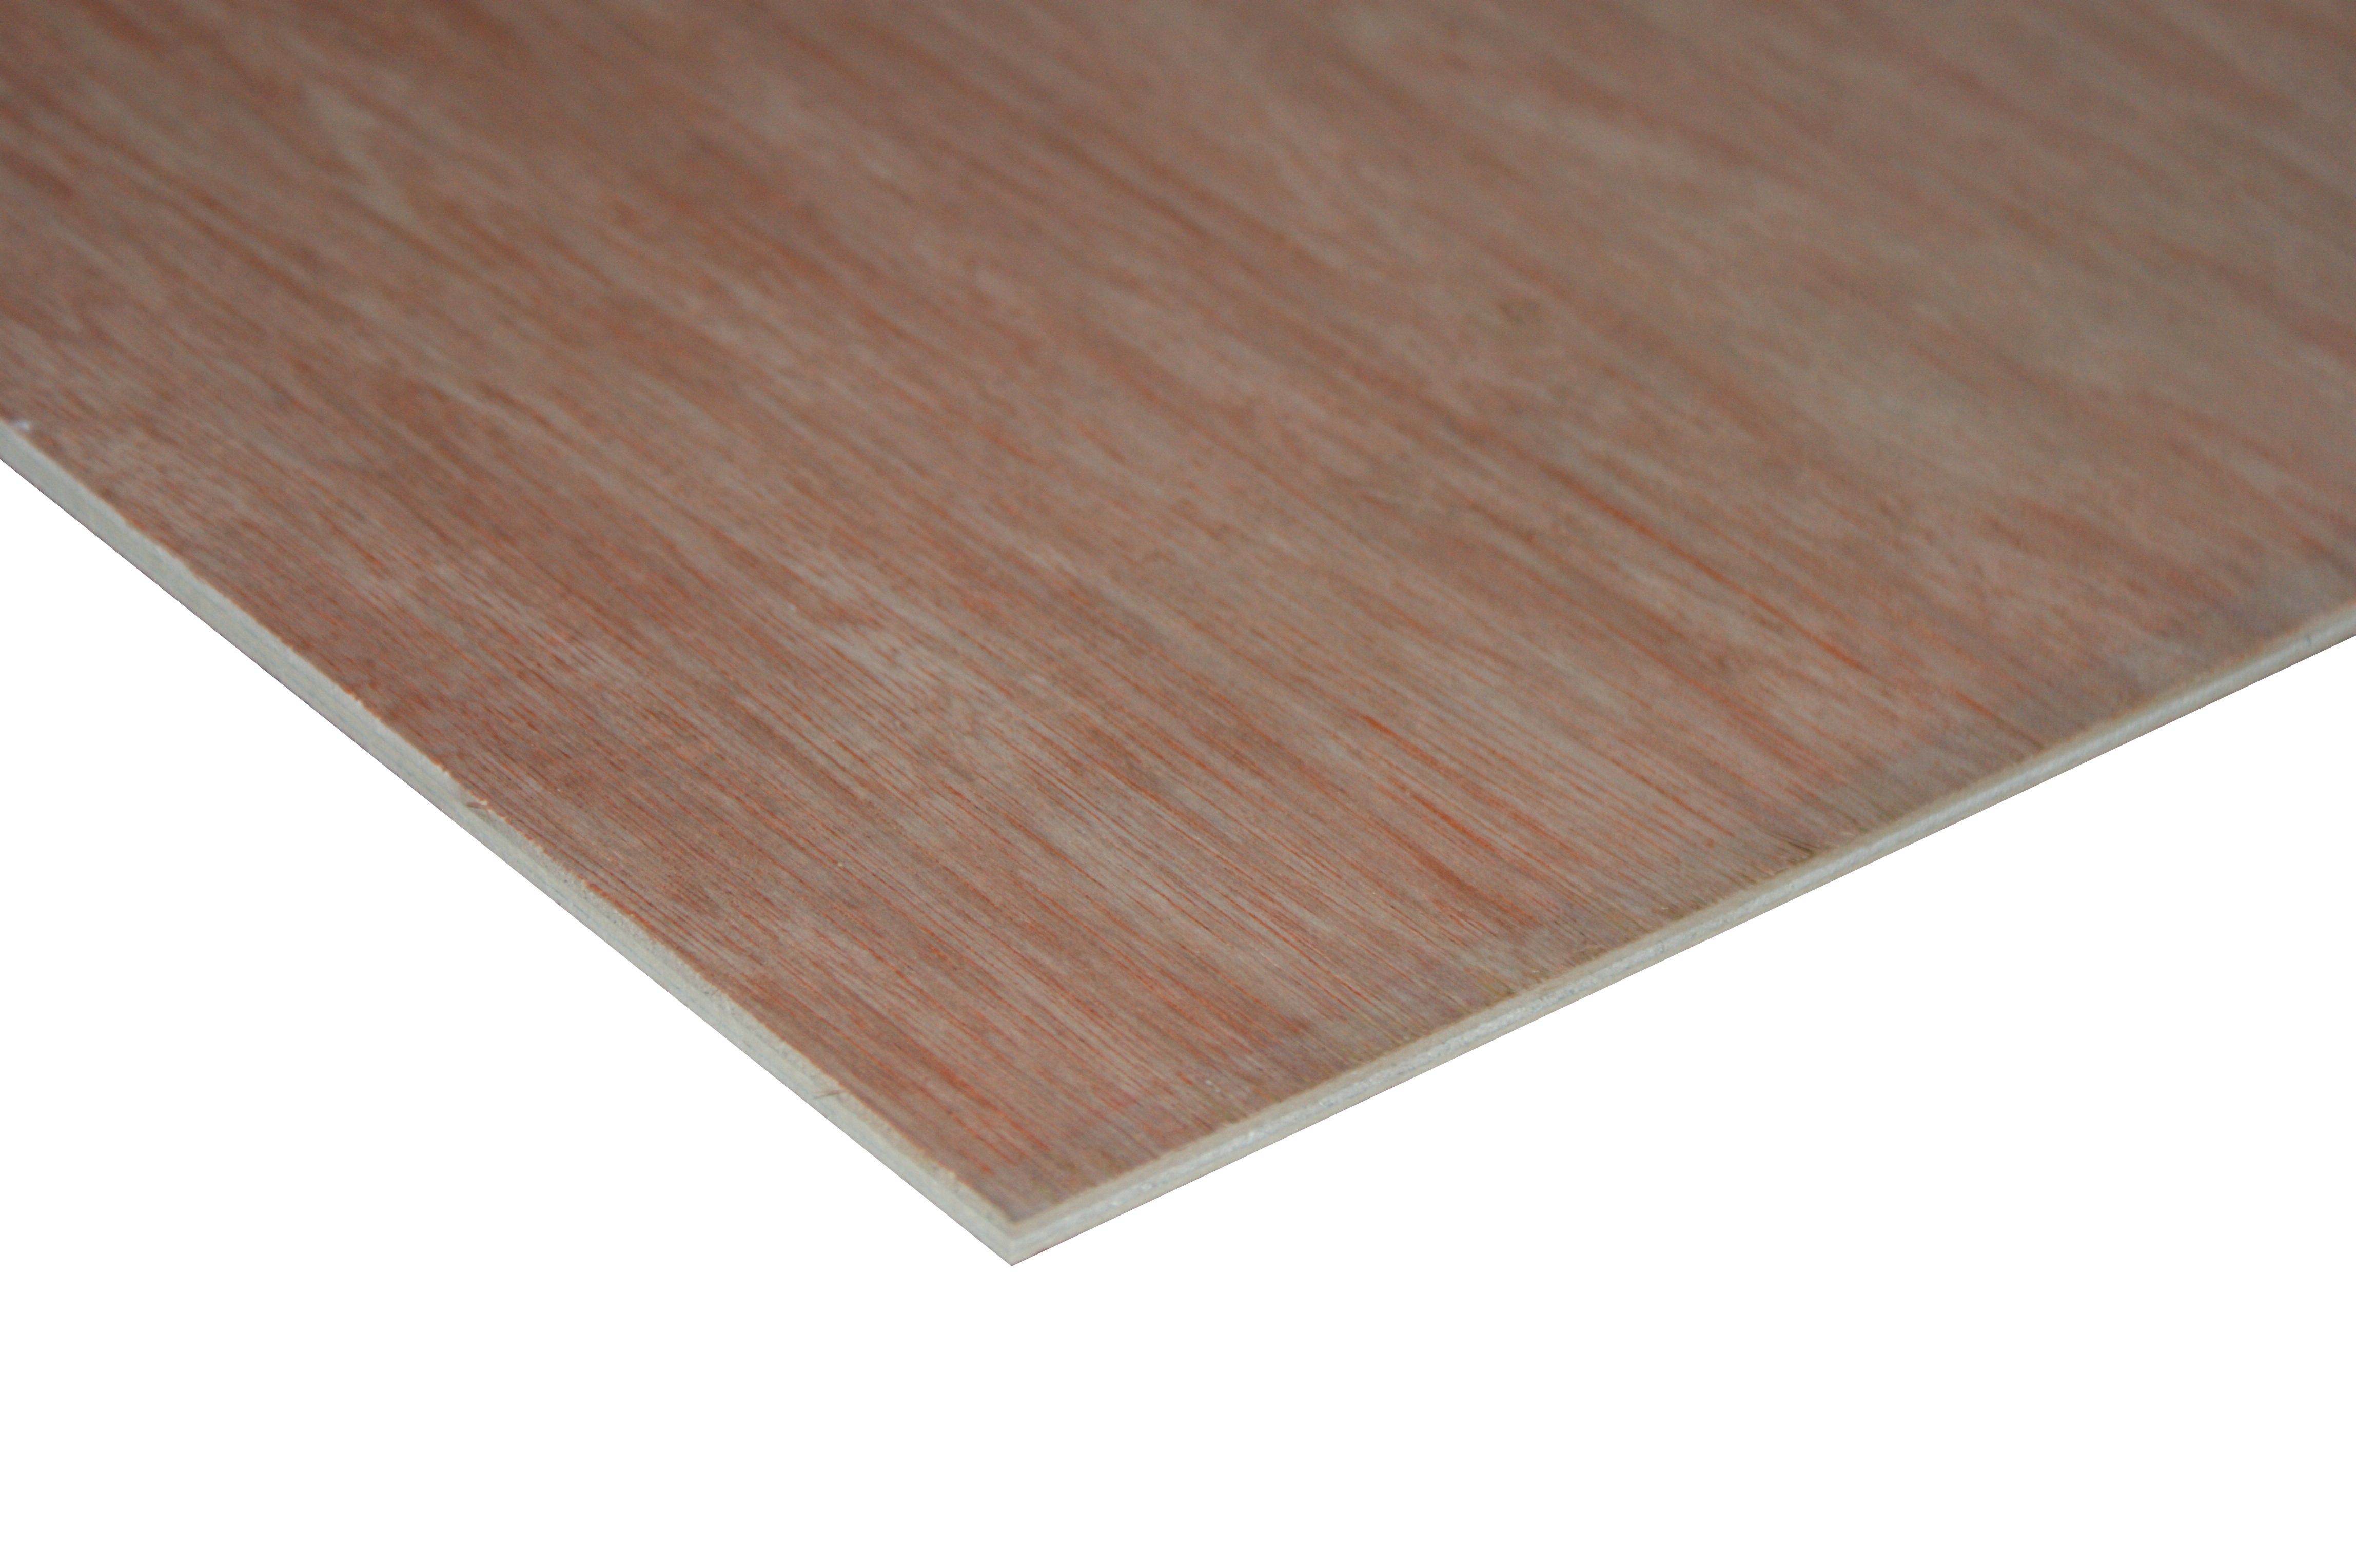 Image of Wickes Non-Structural Hardwood Plywood - 5.5 x 607 x 1829mm